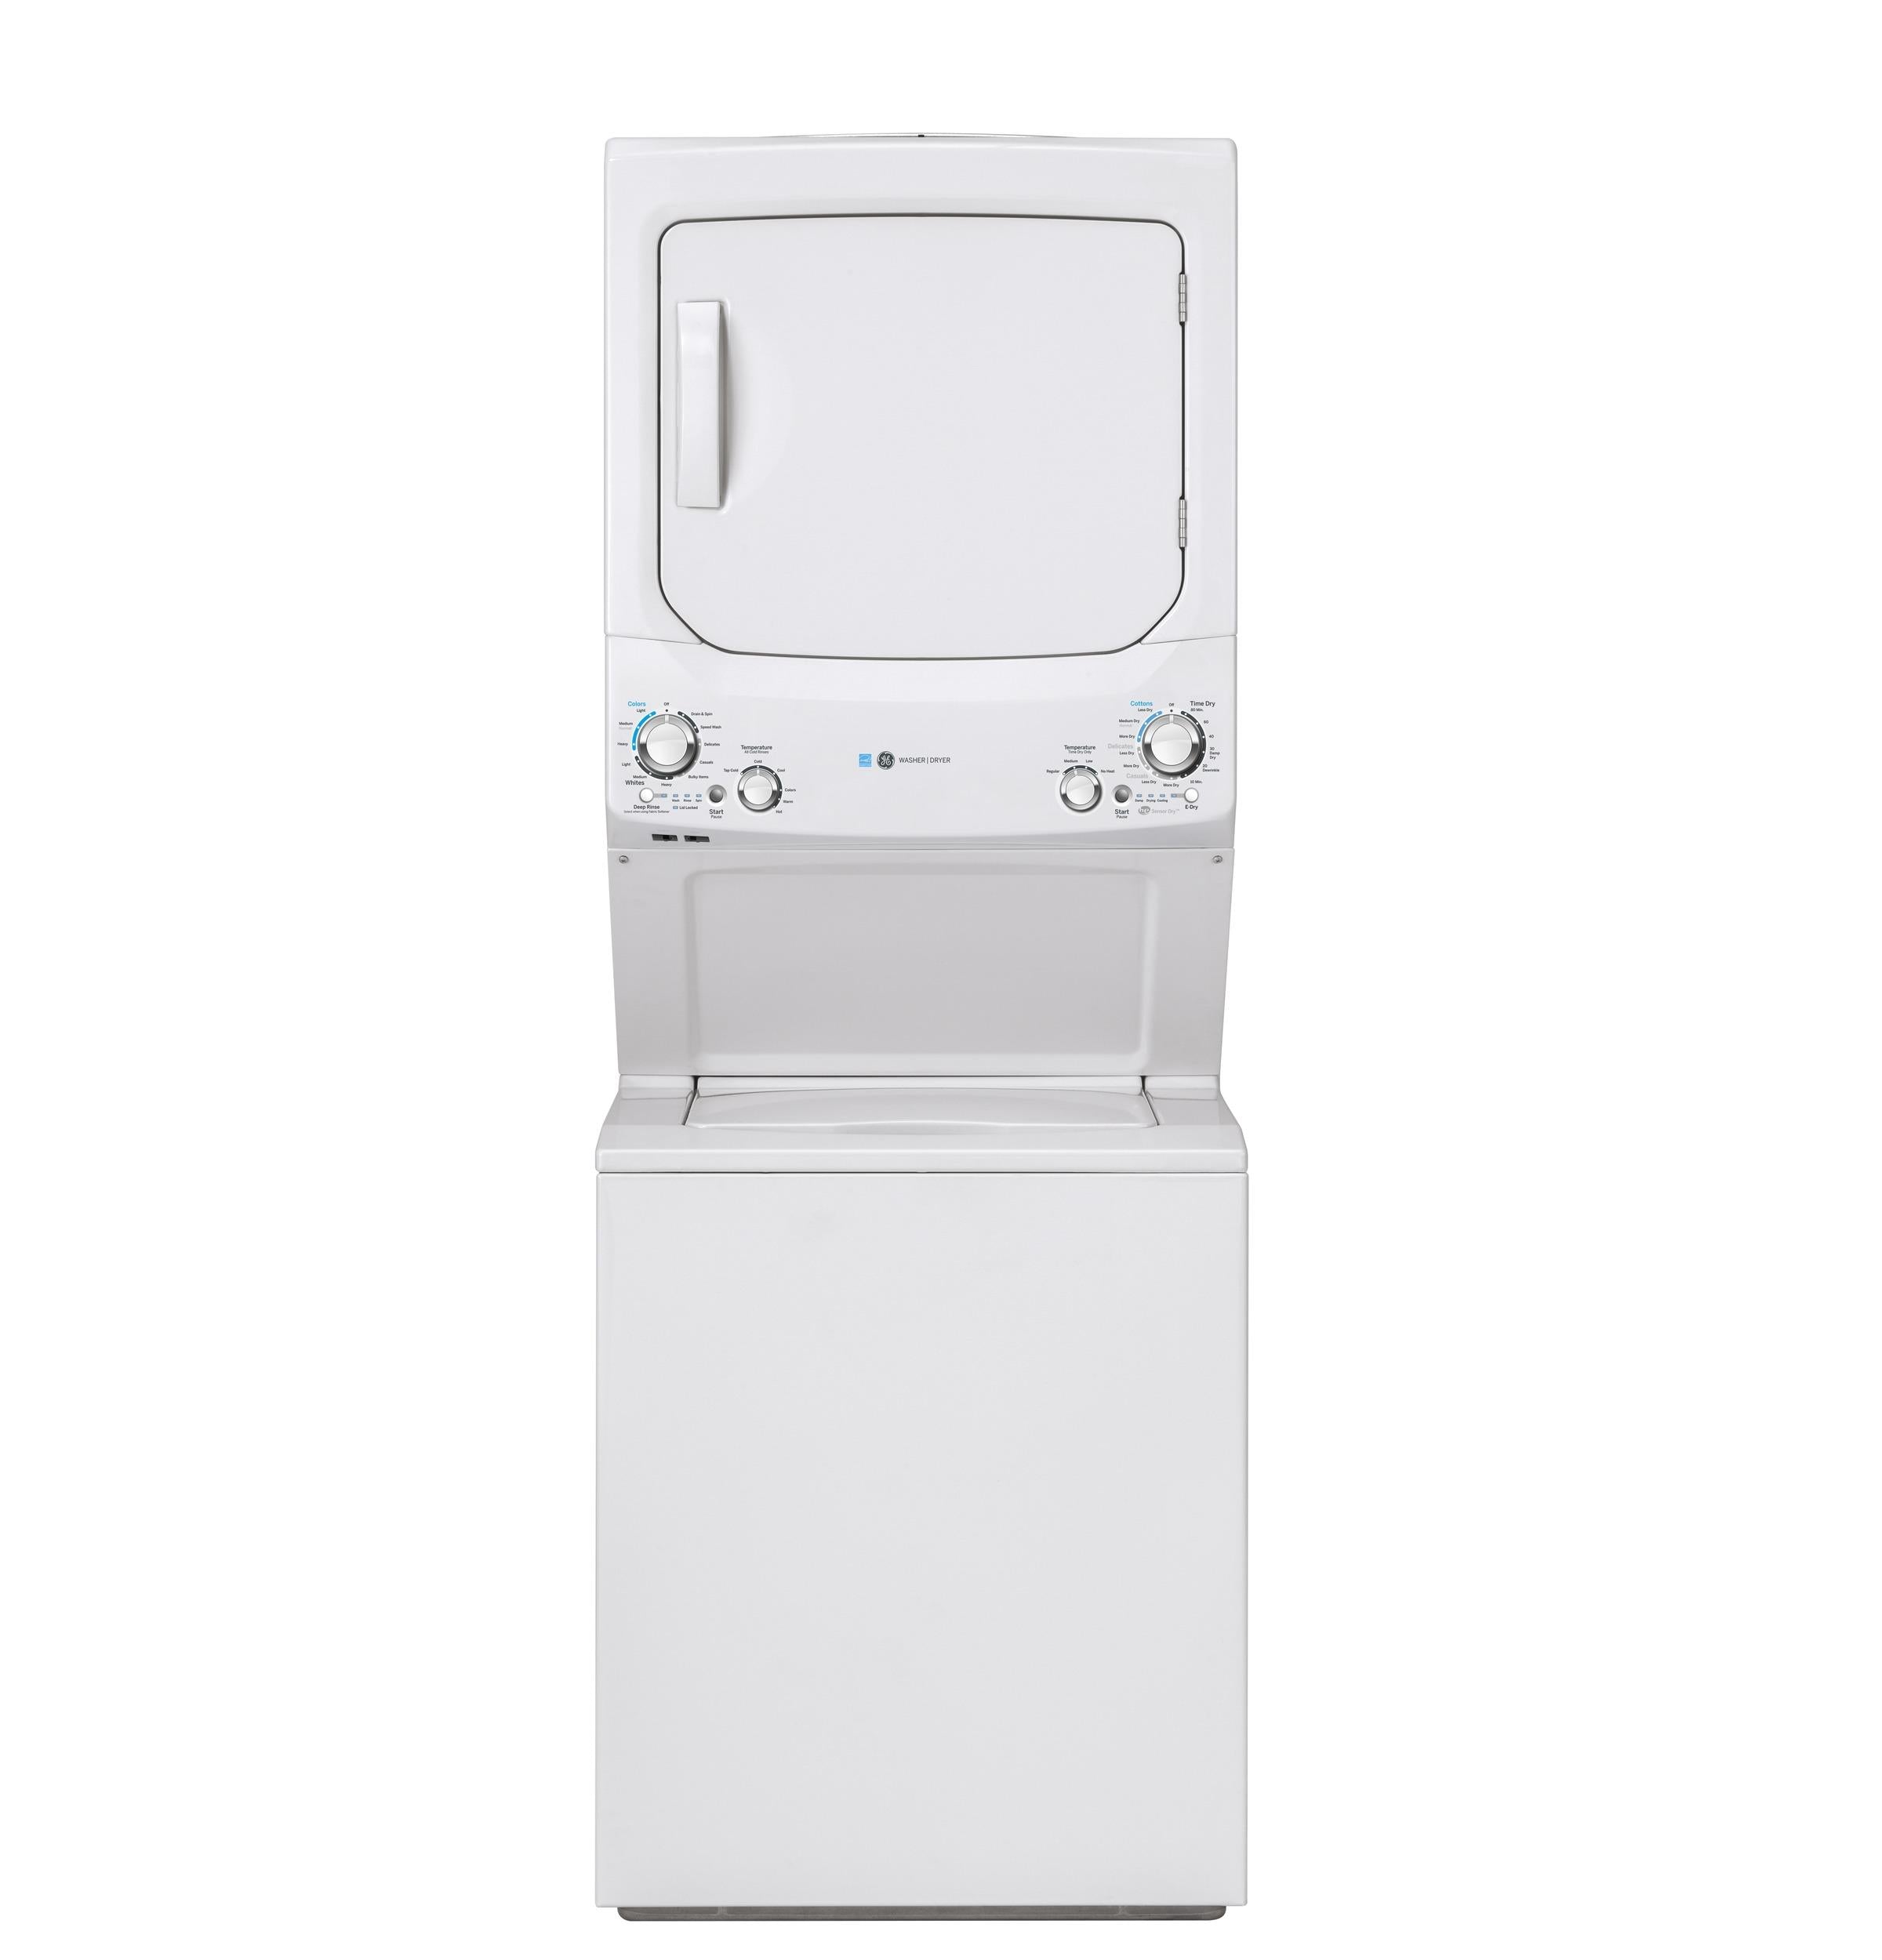 GE Unitized Spacemaker® ENERGY STAR® 3.9 cu. ft. Capacity Washer with Stainless Steel Basket and 5.9 cu. ft. Capacity Gas Dryer